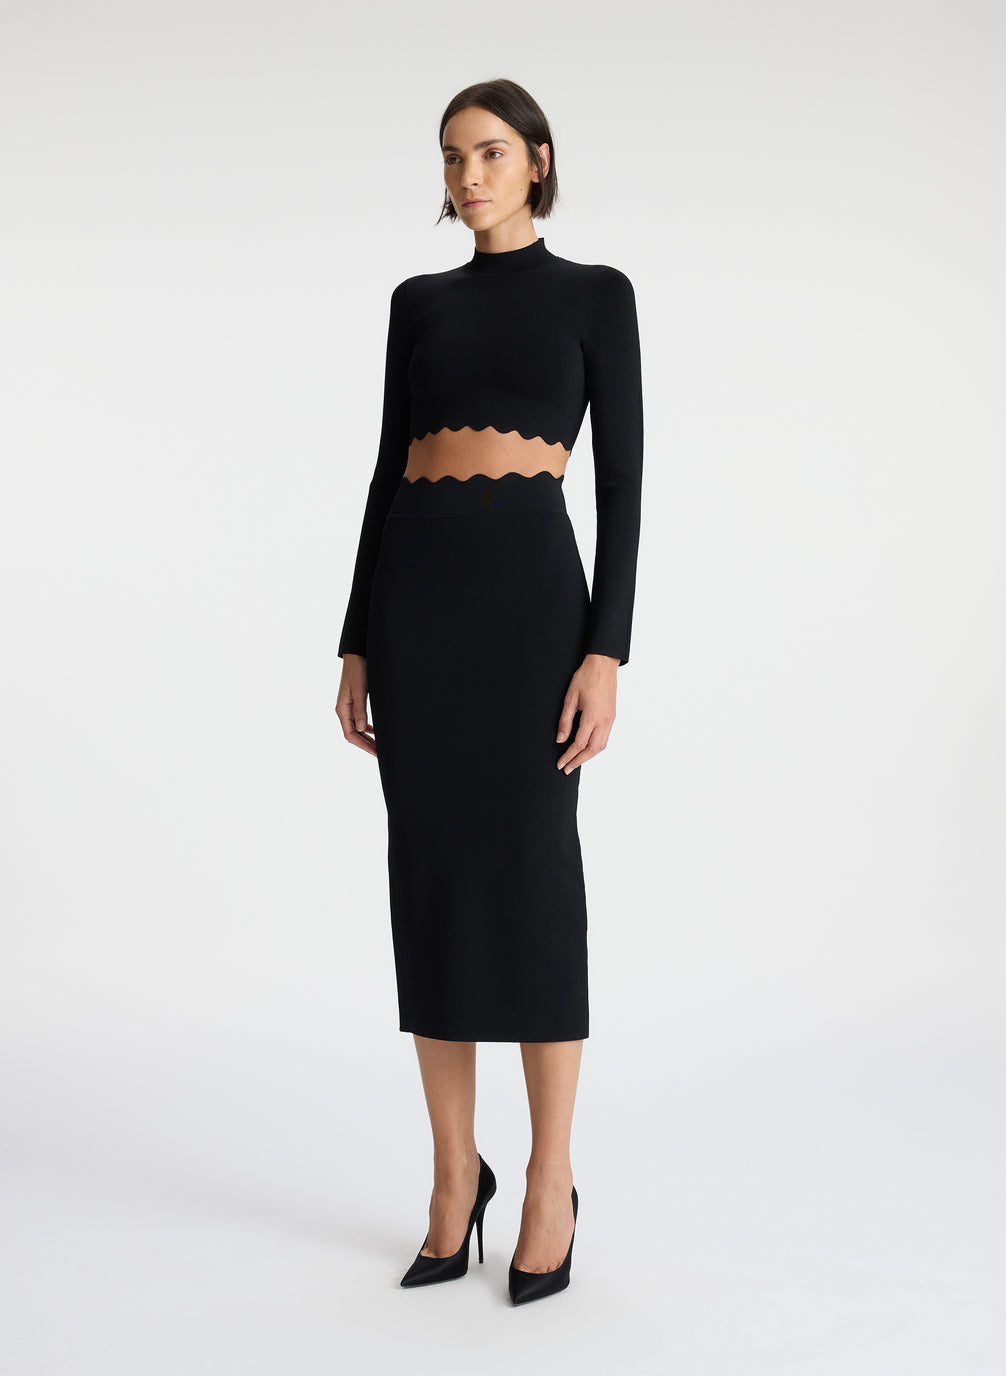 side view of woman wearing black long sleeve crop top with scallop detailing and matching black scalloped detailing knit midi skirt